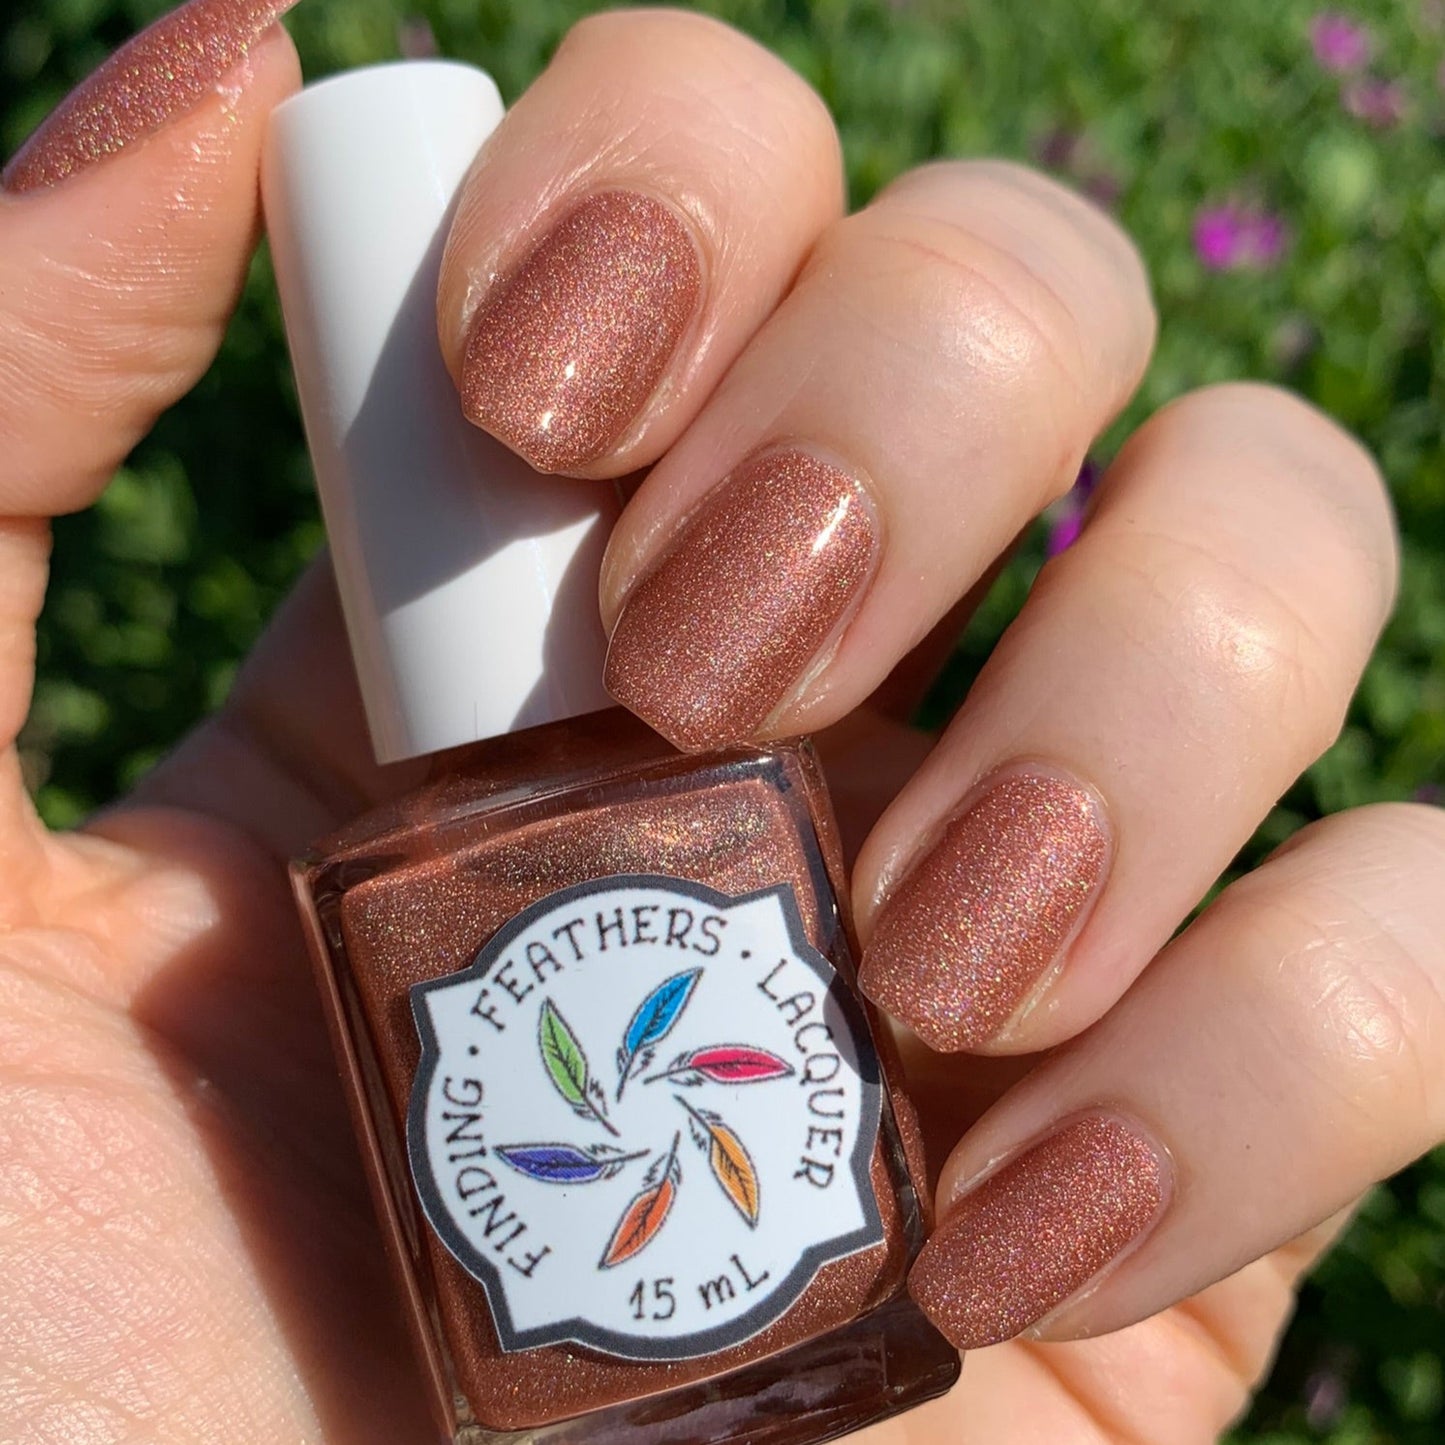 Pennies from Heaven *CHARITY POLISH*